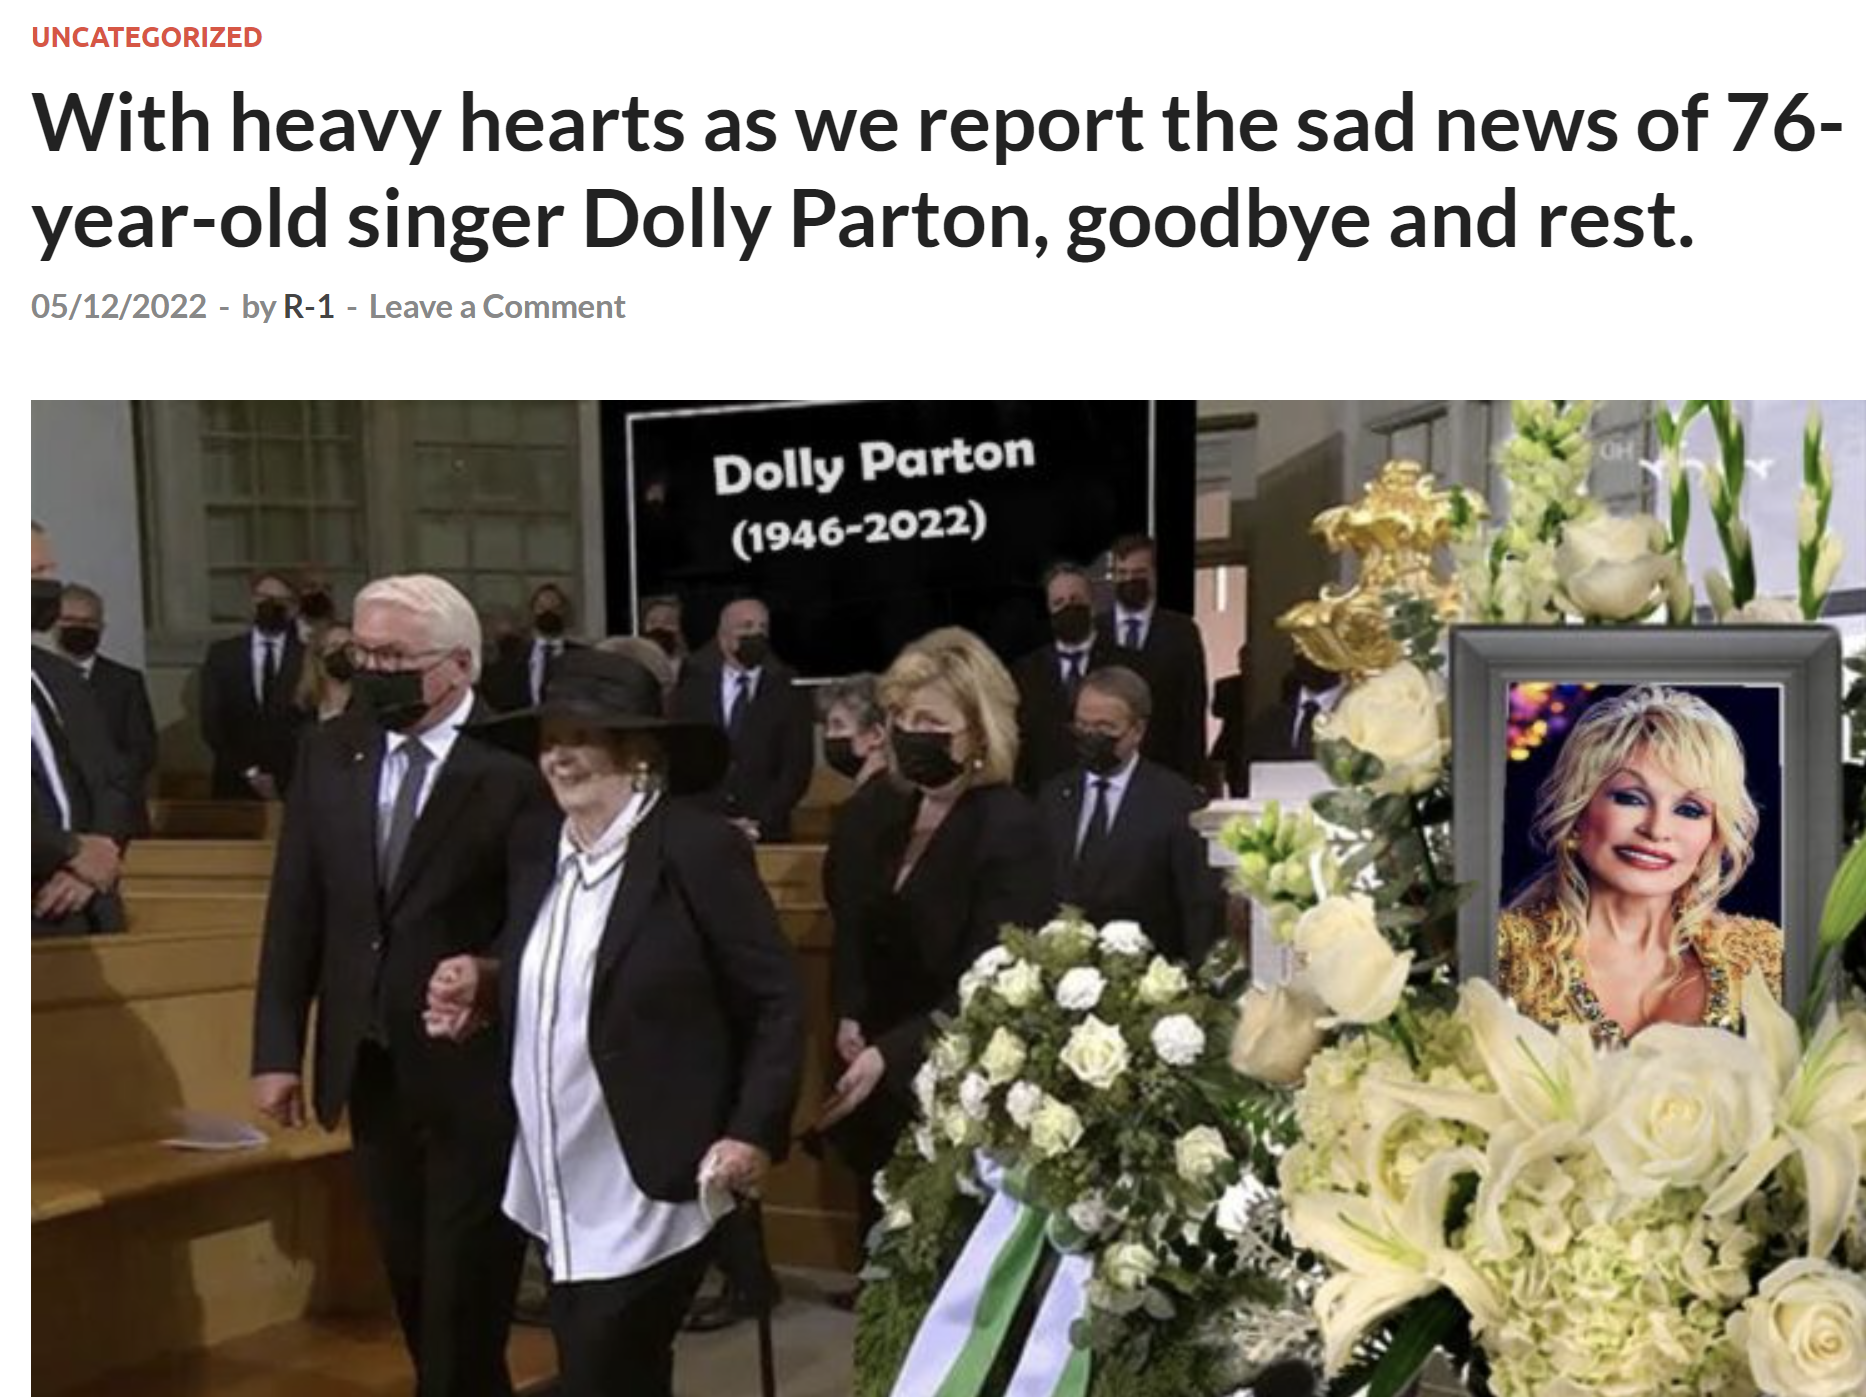 Fact Check Dolly Parton Has NOT Passed Away As Of December 5, 2022